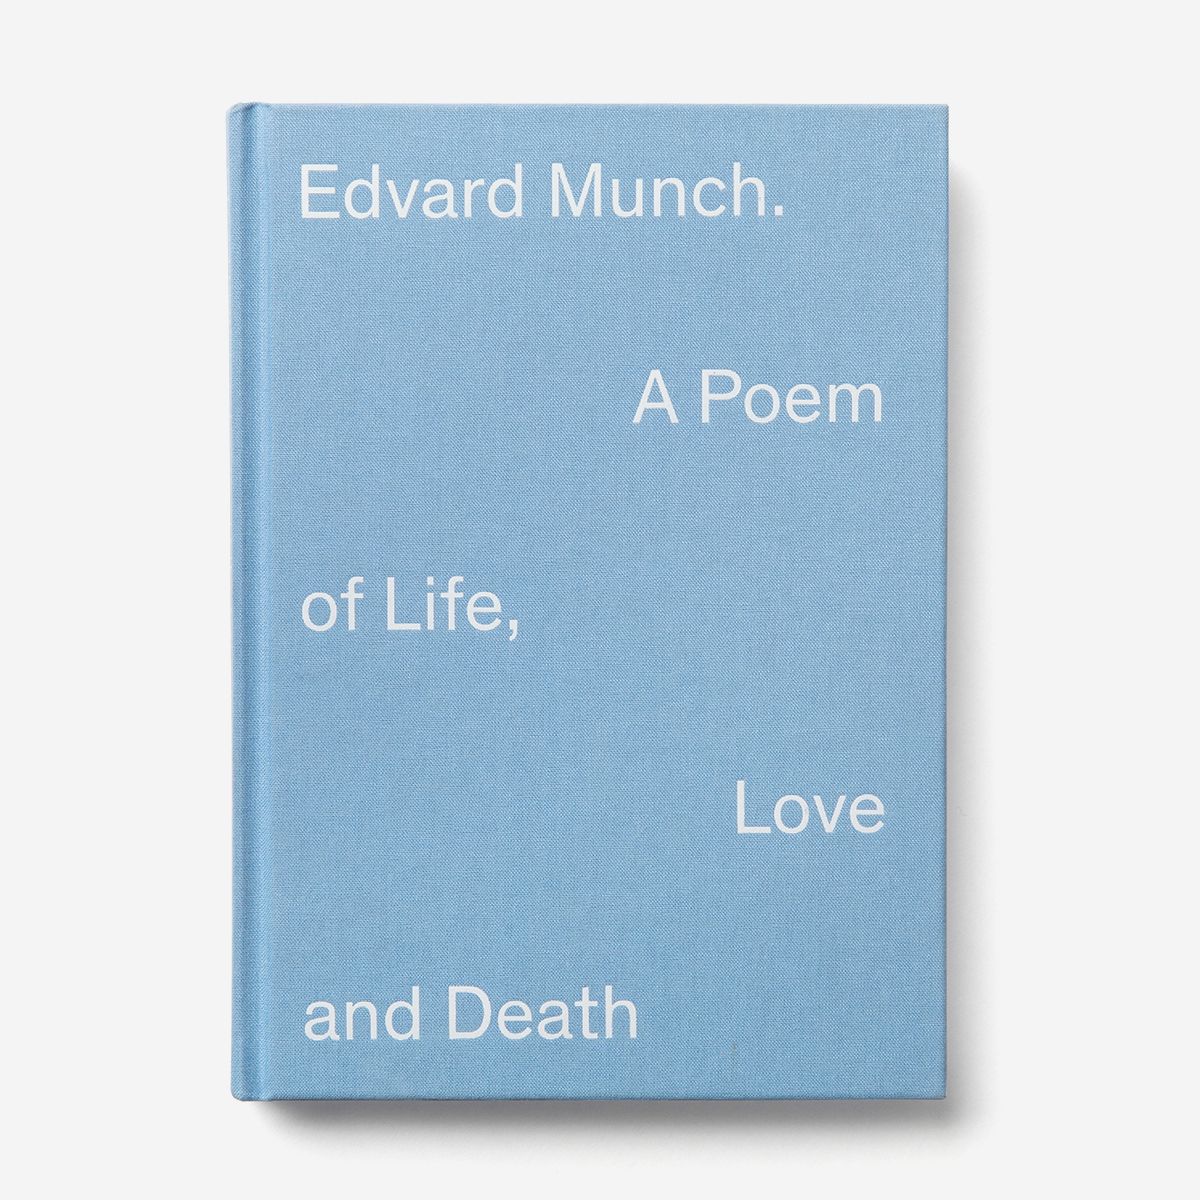 Edvard Munch. A poem of Life, Love and Death